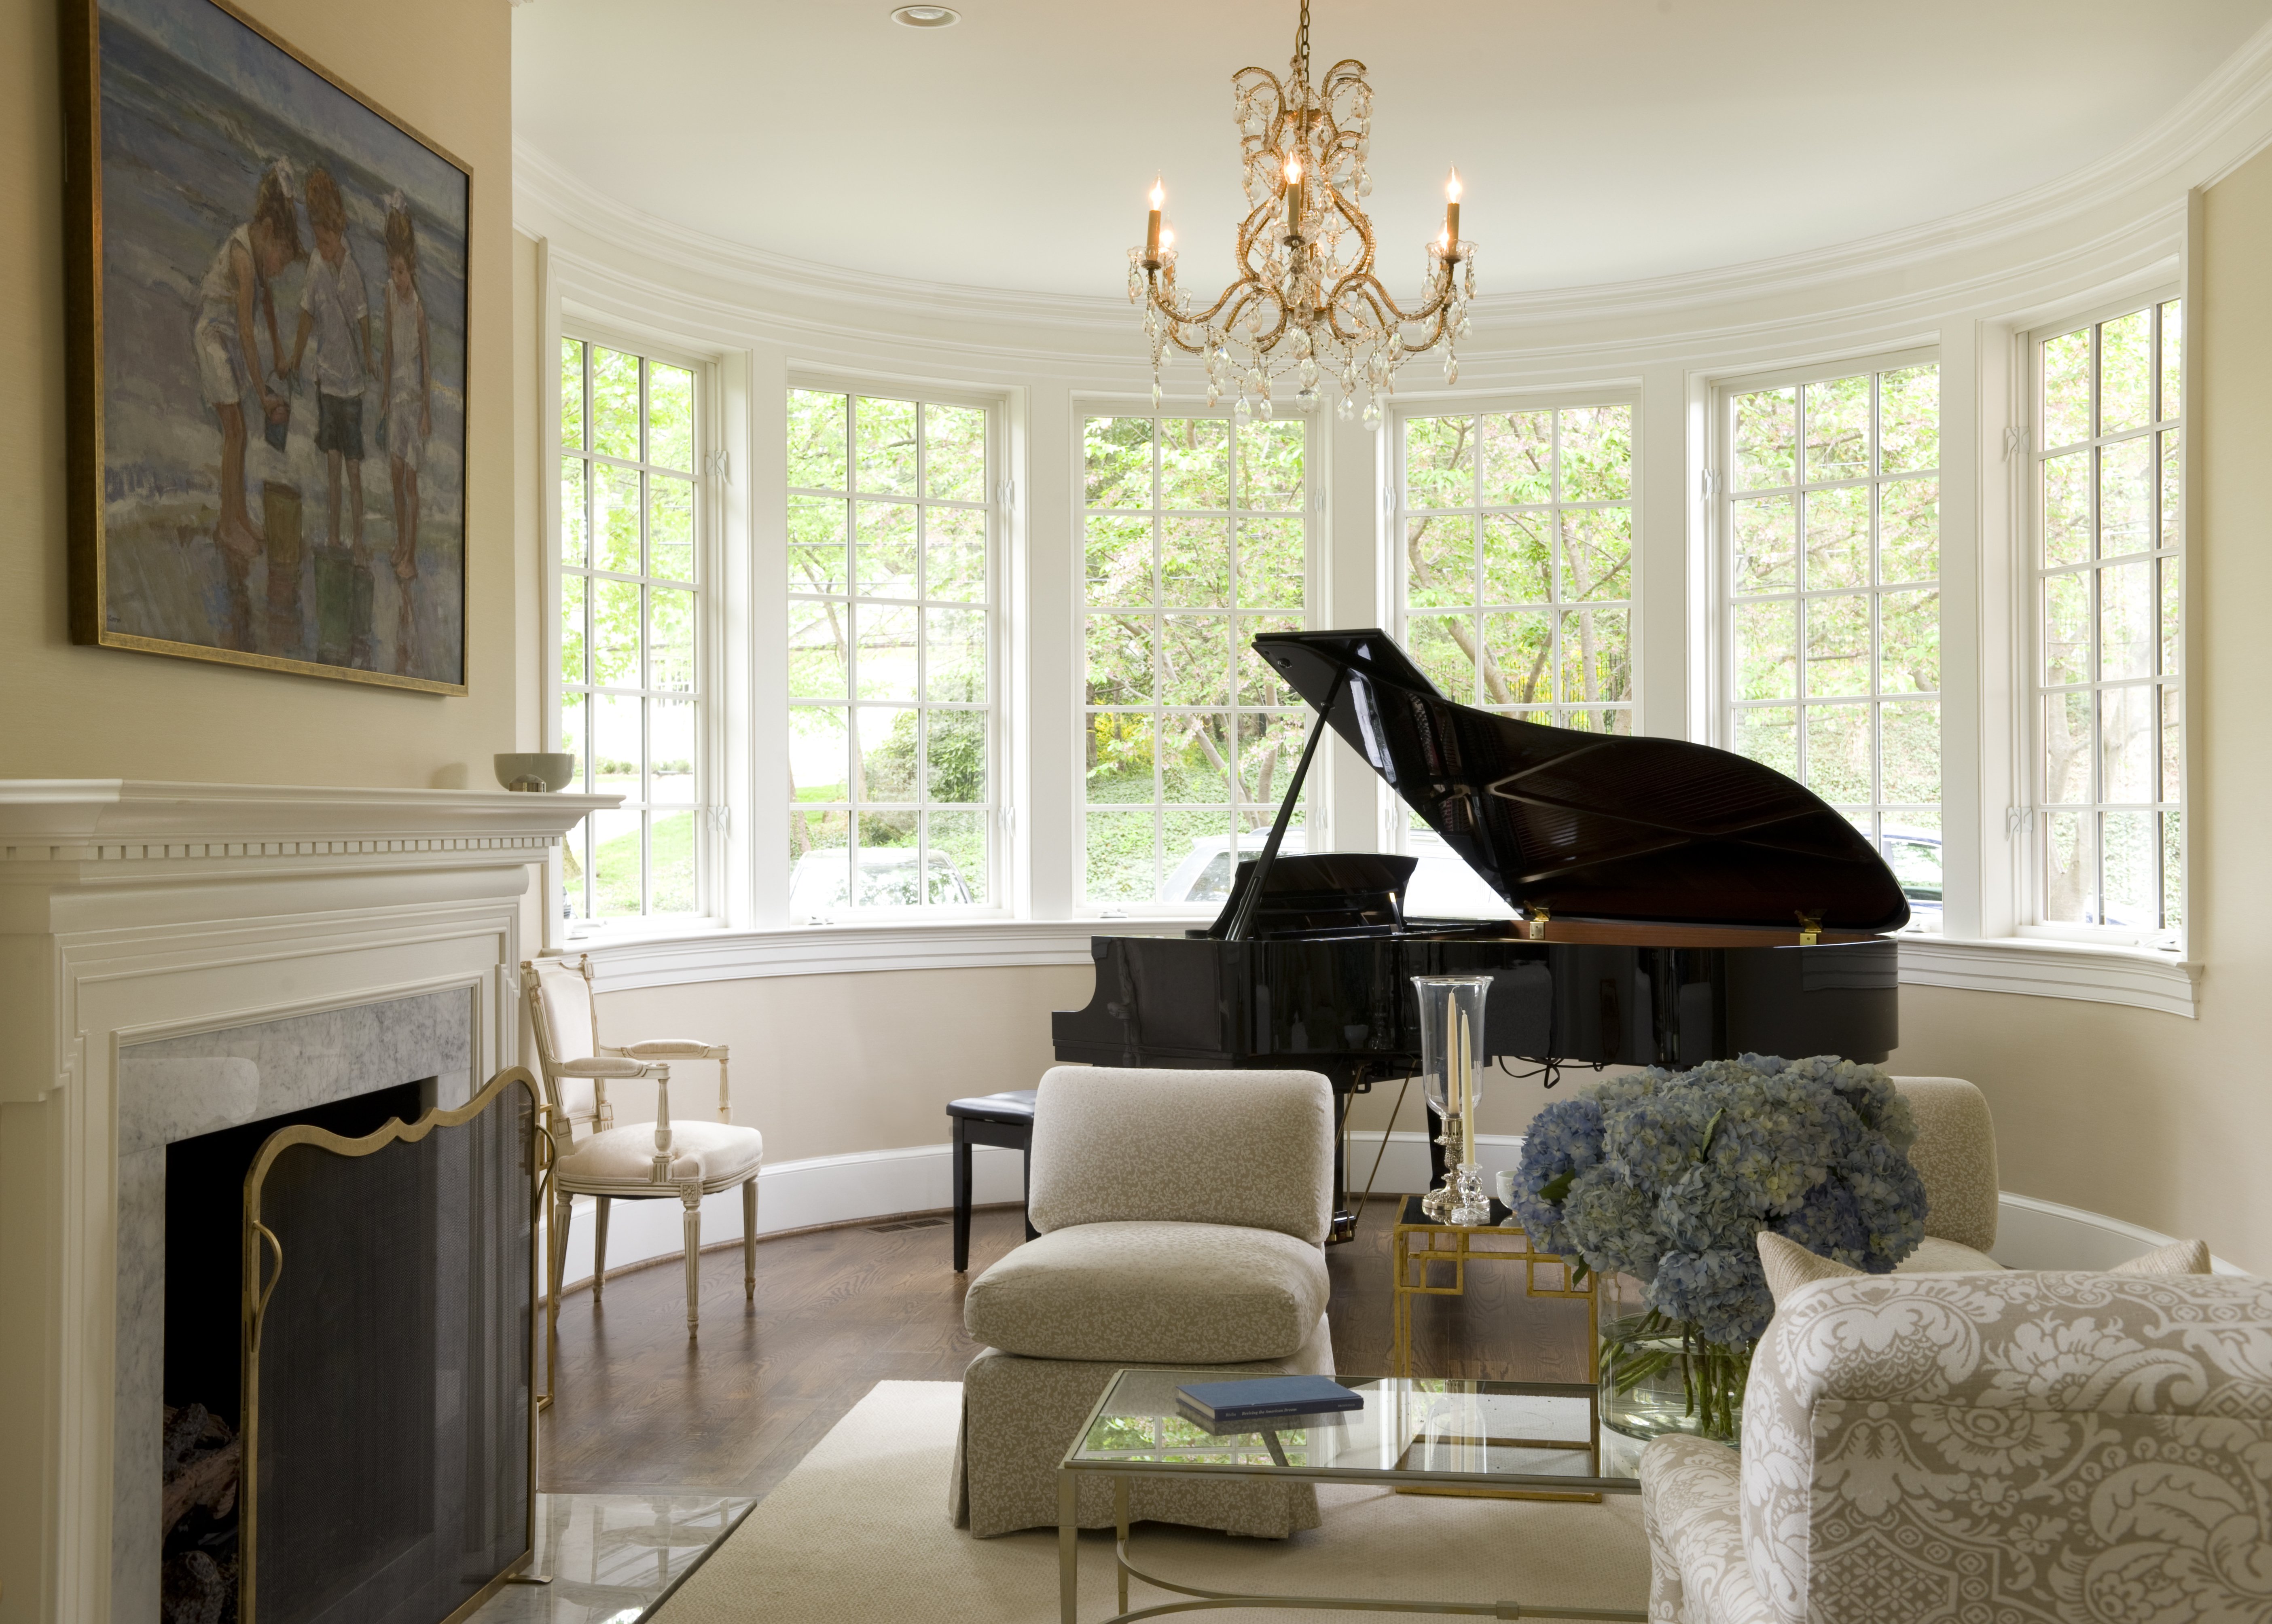 Geoff Tracy and Norah O'Donnell's piano room that features a chandelier and a marble fireplace. | Photo: Getty Images